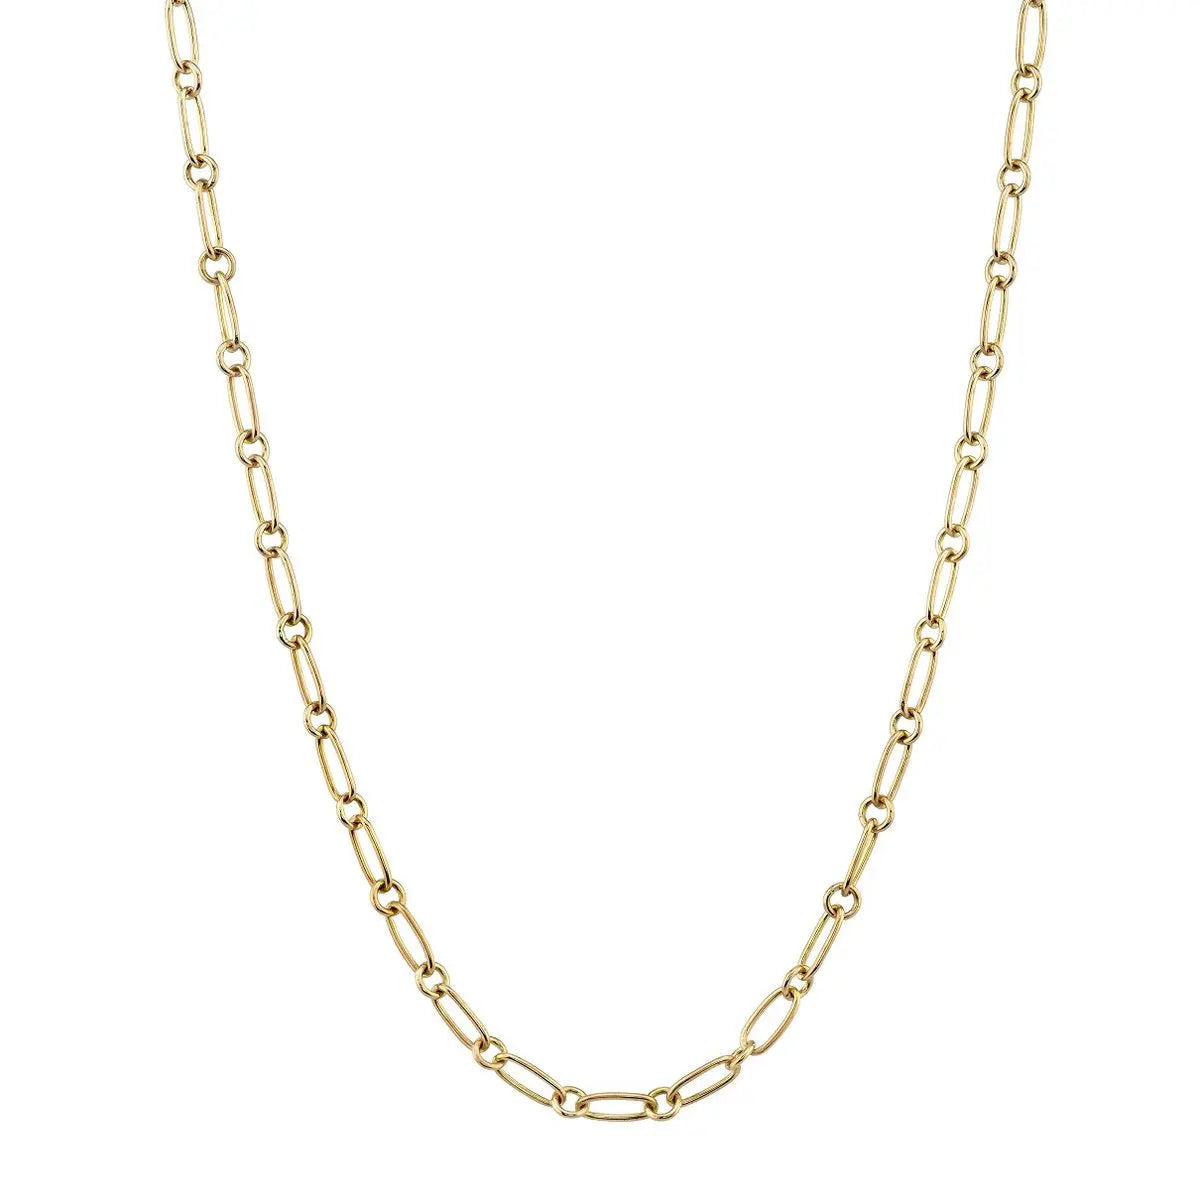 Handcrafted 18K yellow gold oval and round link chain. Chain measures 18".  Charms sold separately.   Designed by Single Stone